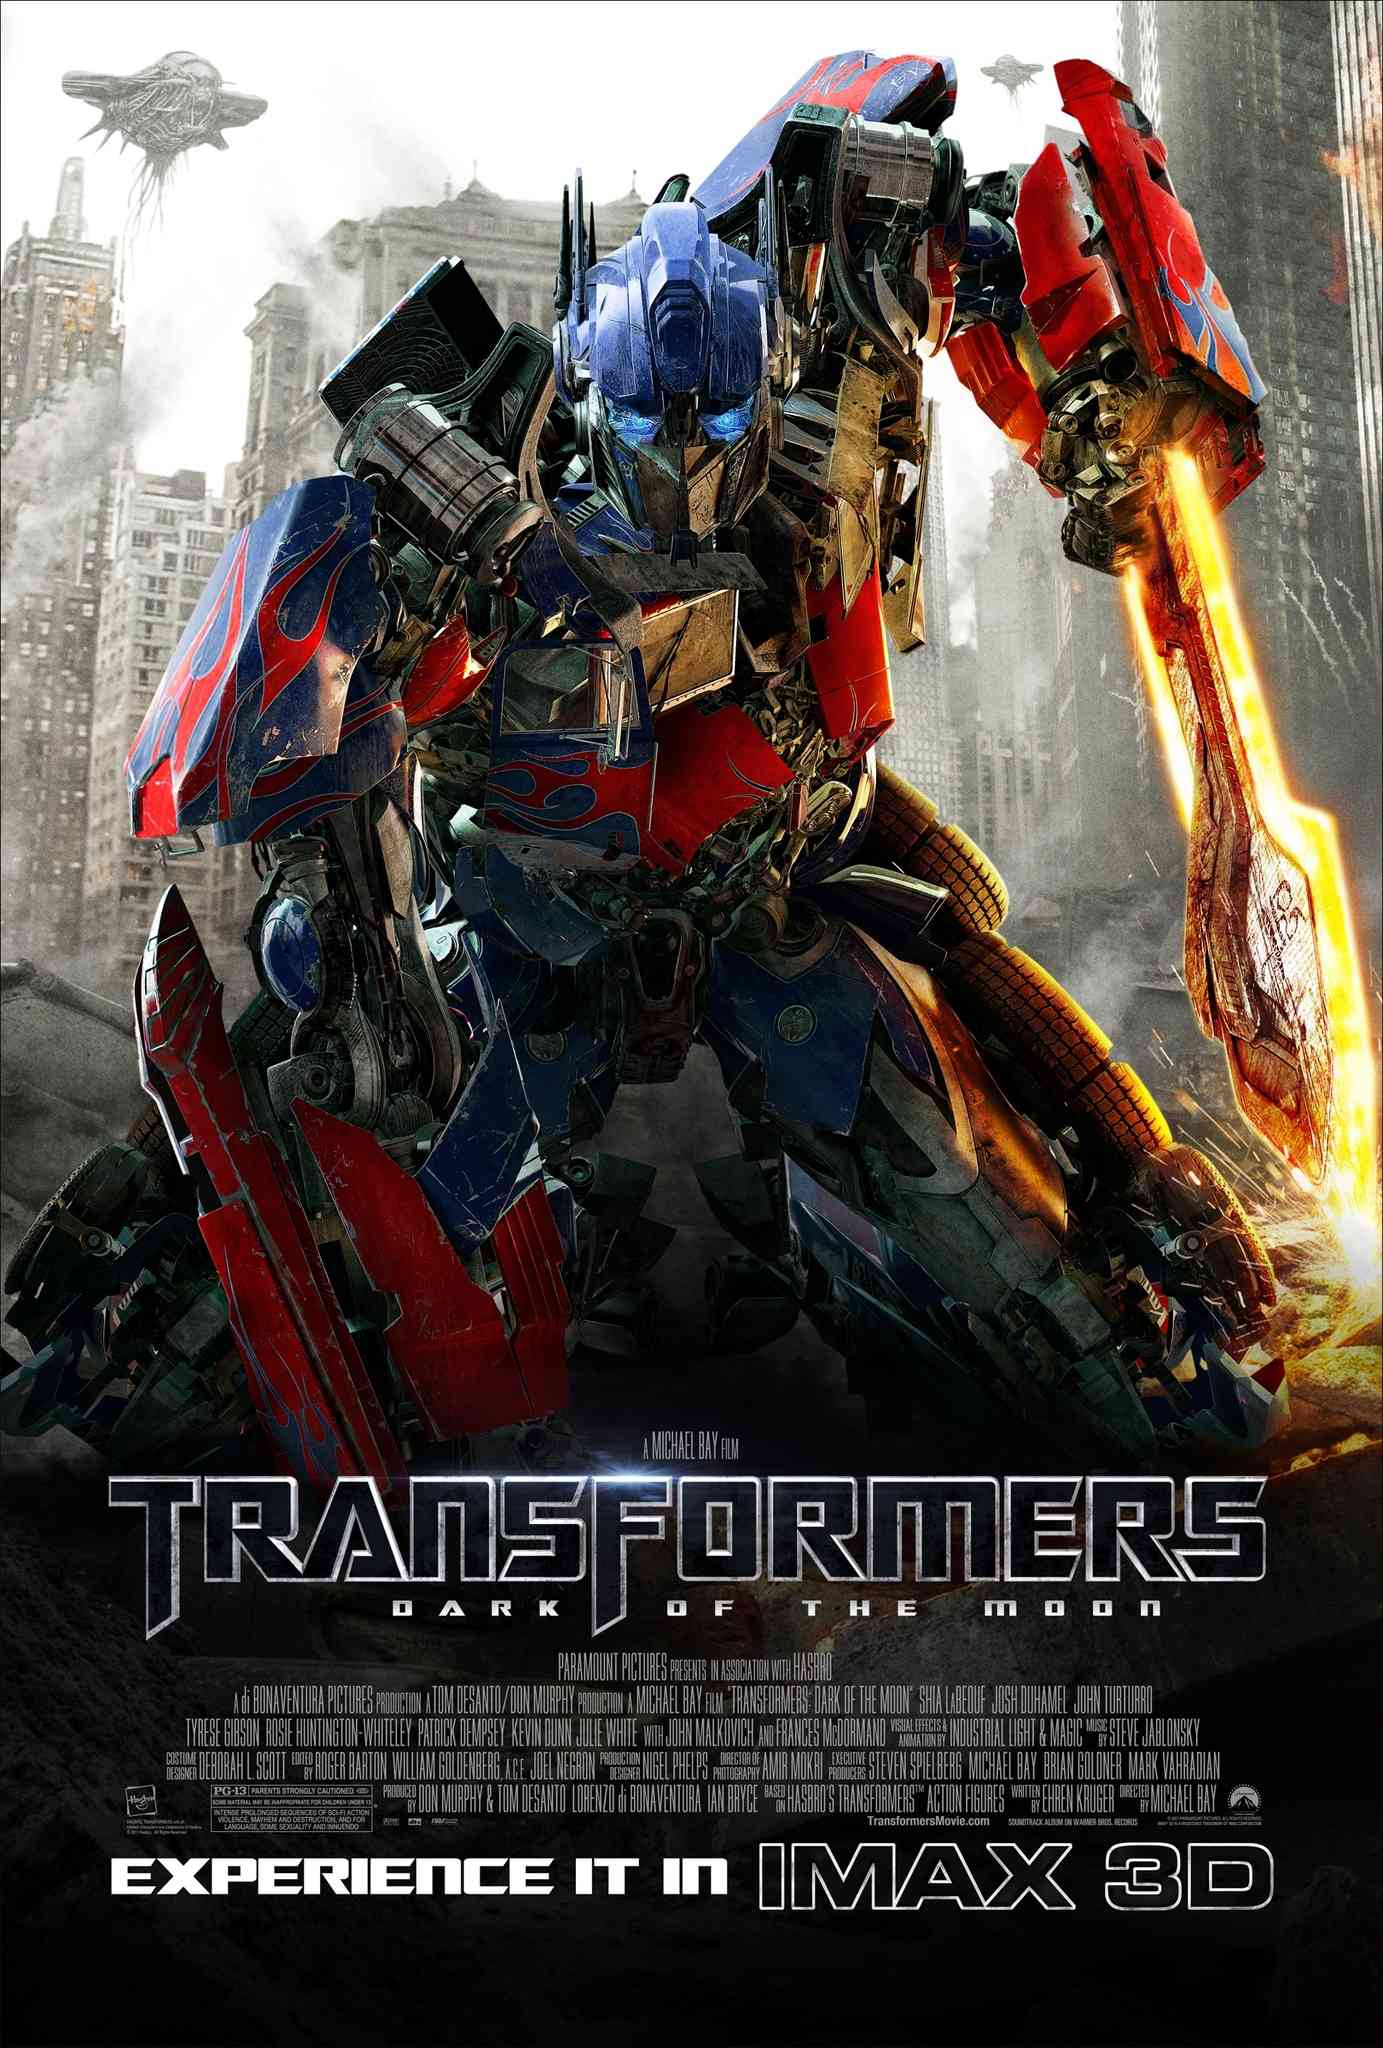 FULL MOVIE: Transformers 3: Dark Of The Moon (2011) [Action]